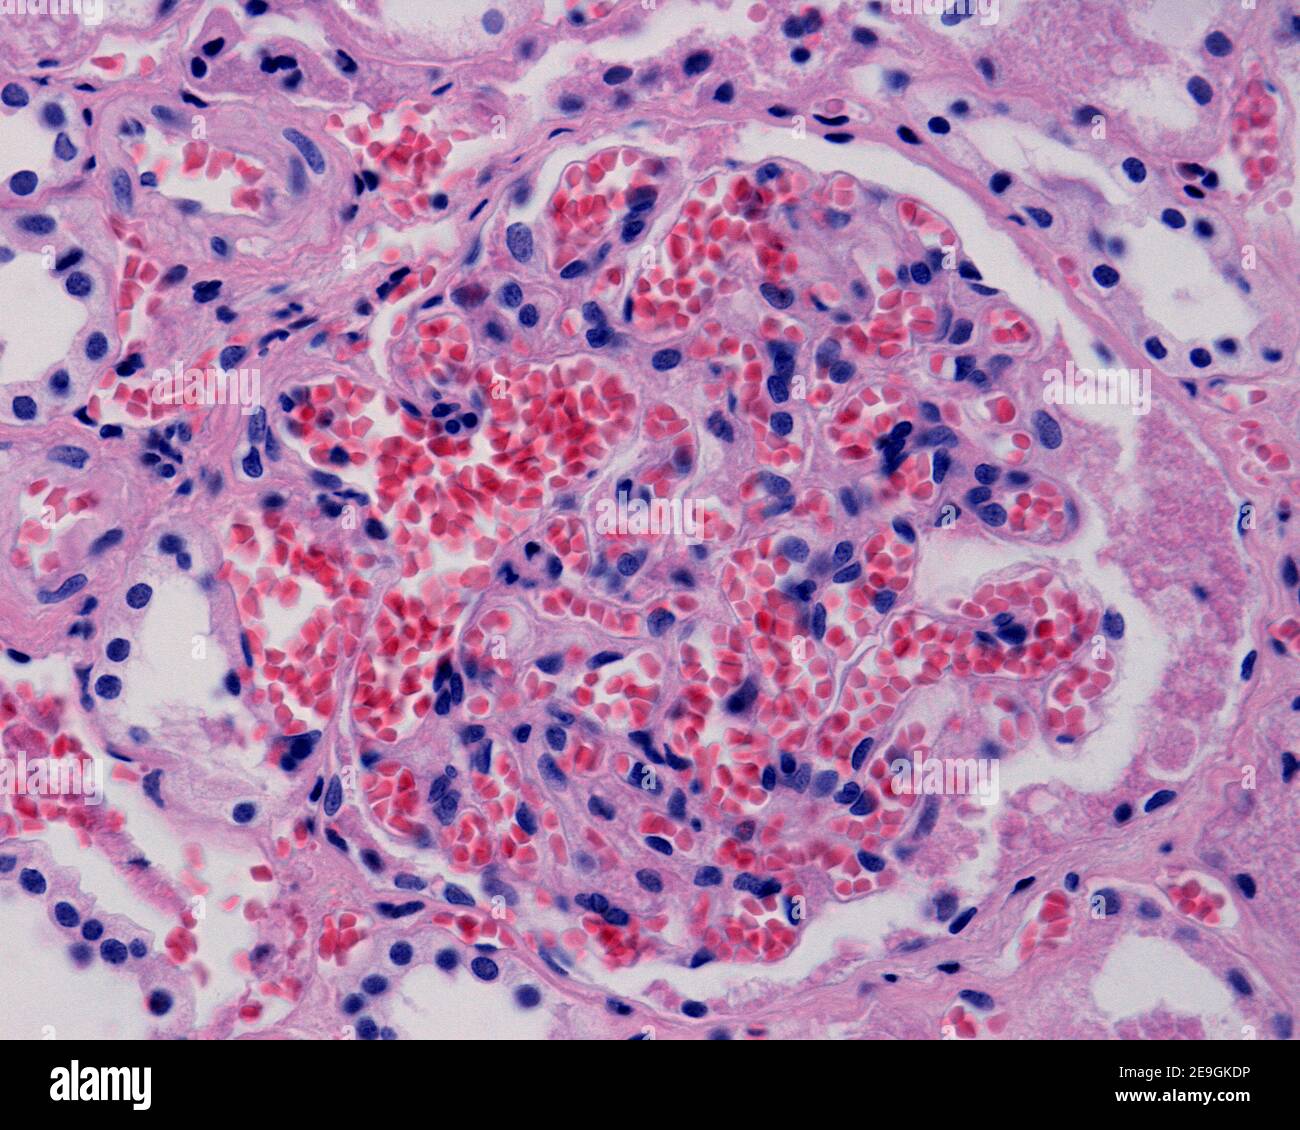 Diseased kidney showing glomerular and peritubular congestion. The glomerular capillaries appear very dilated and full of red blood cells. Human kidne Stock Photo